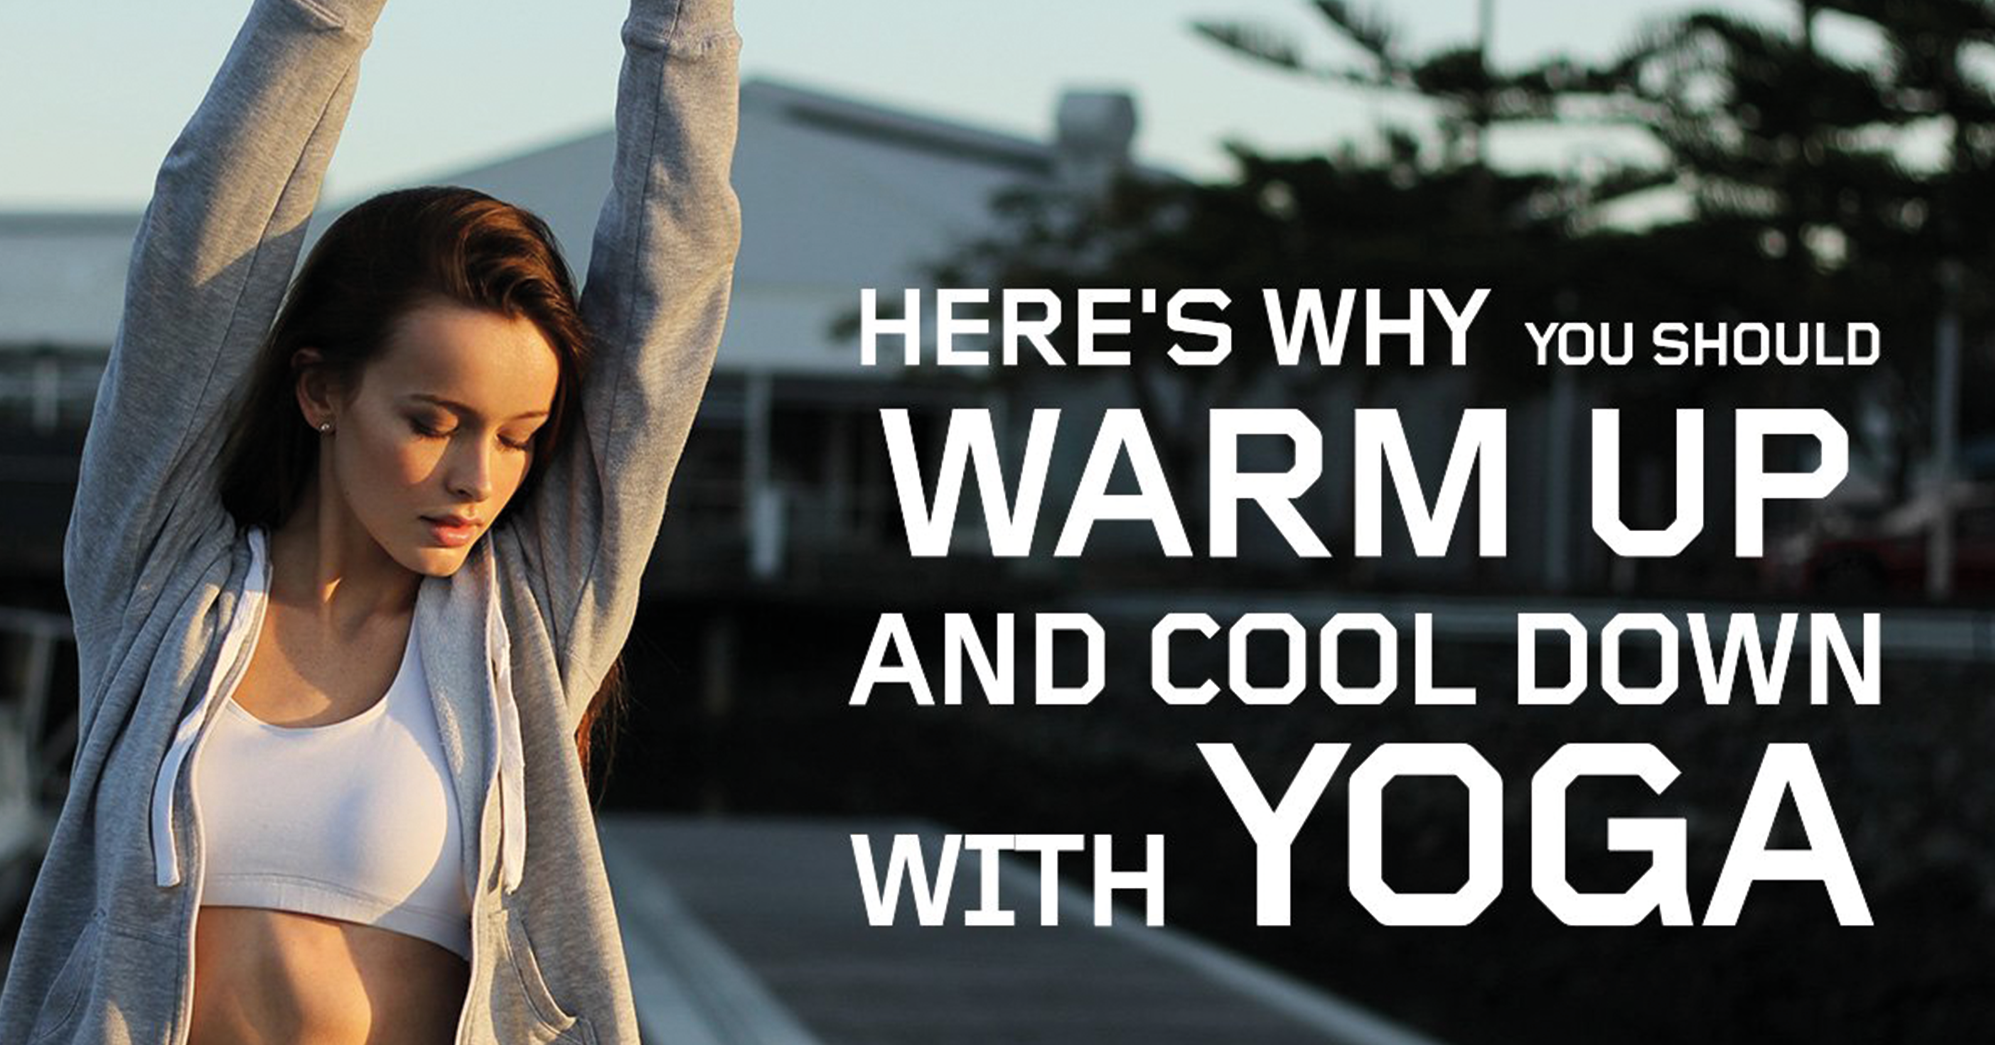 Reasons why you should warm up and cool down with yoga